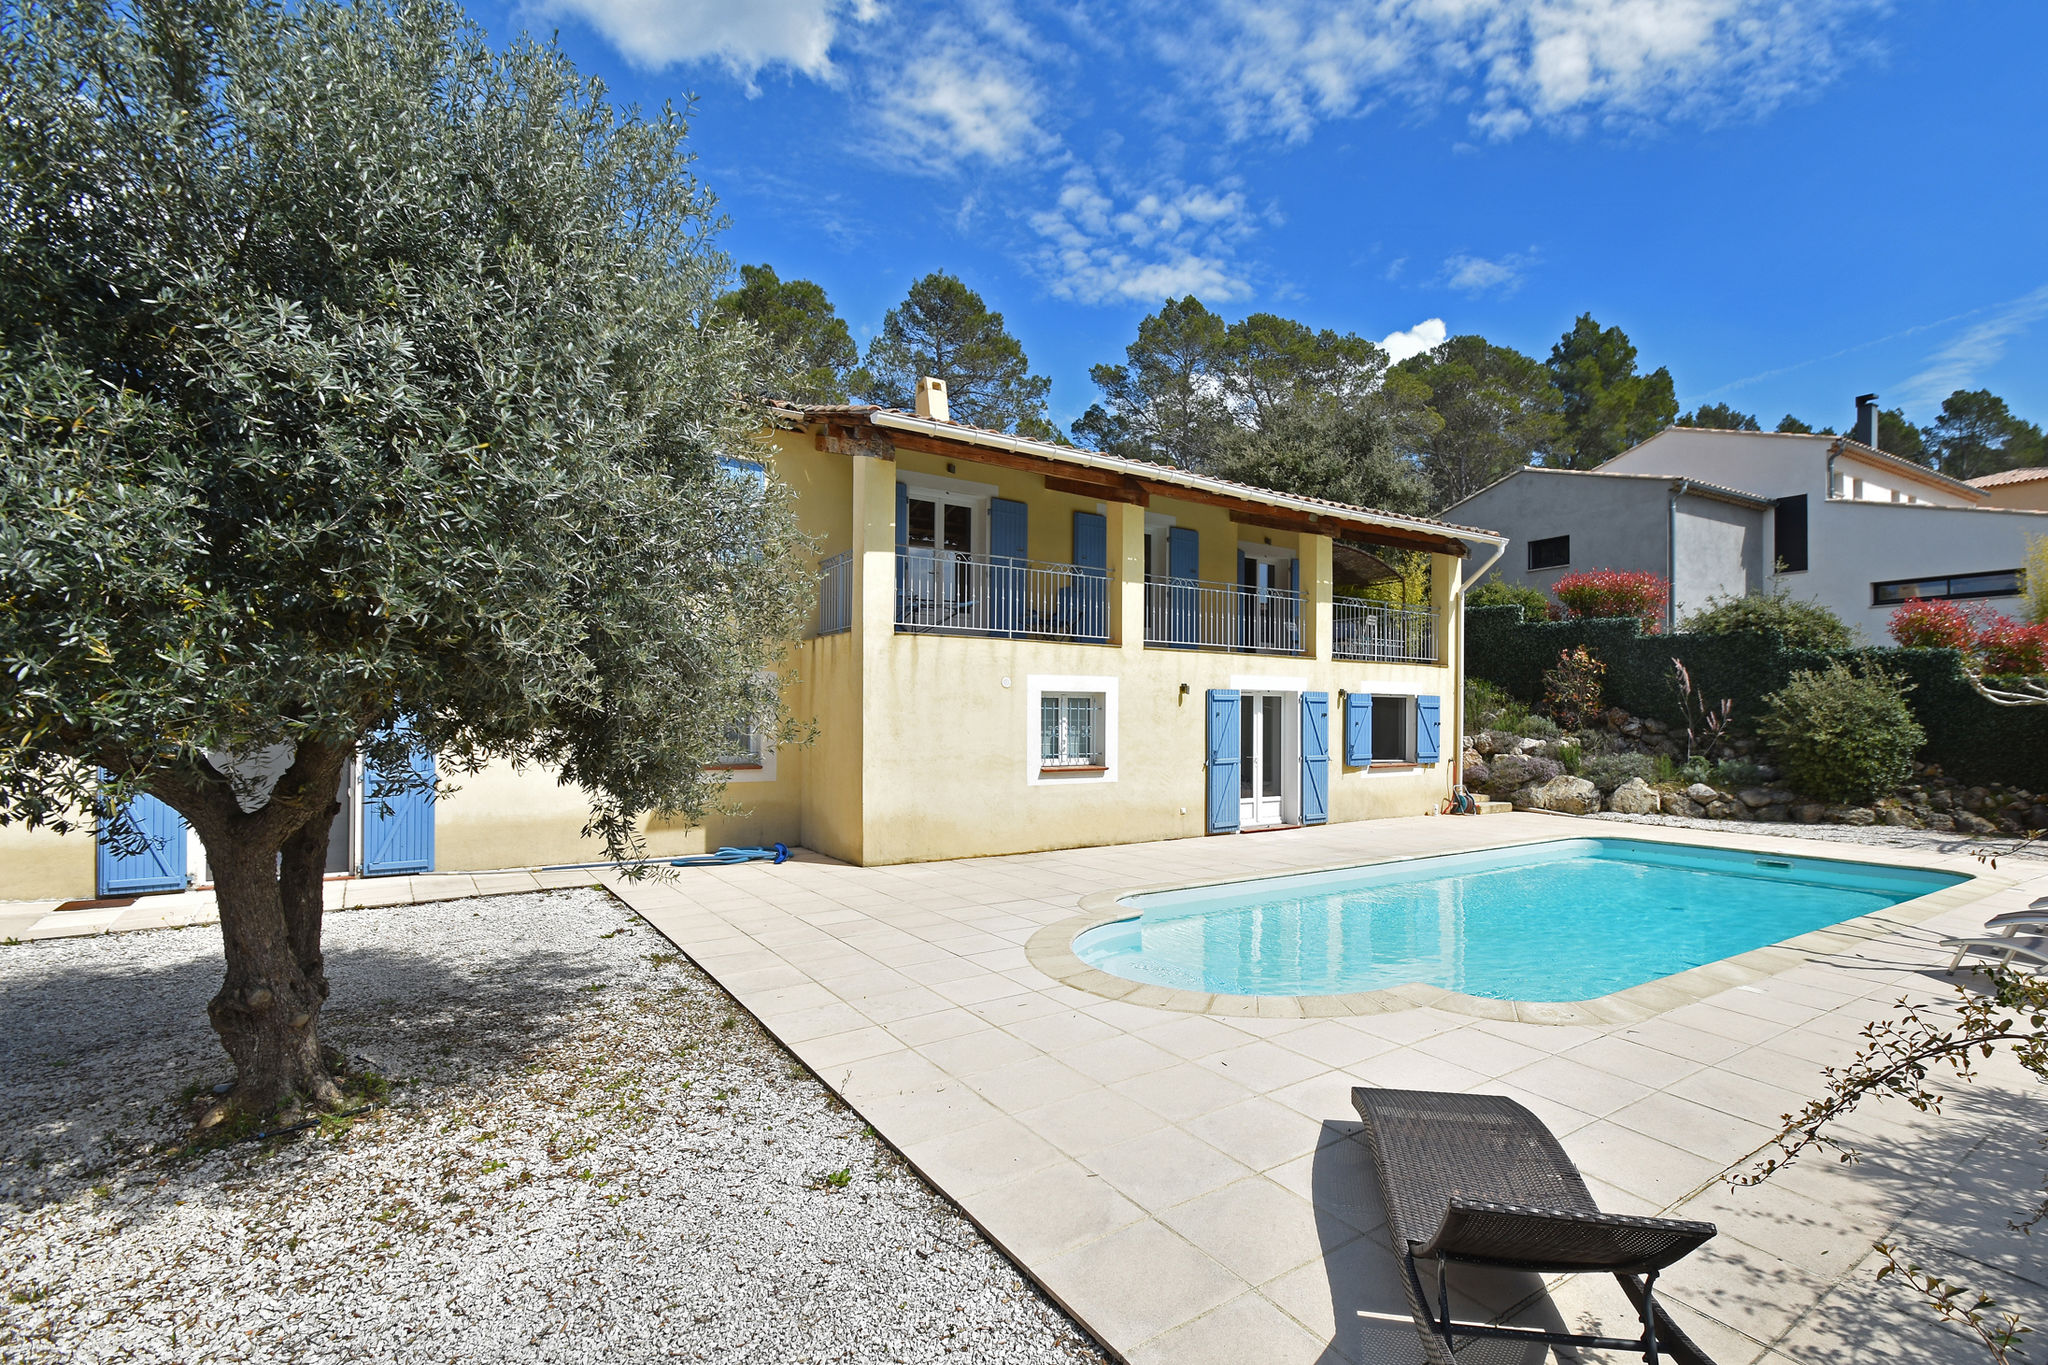 Spacious villa with private swimming pool, fabulous view, near Côte d'Azur